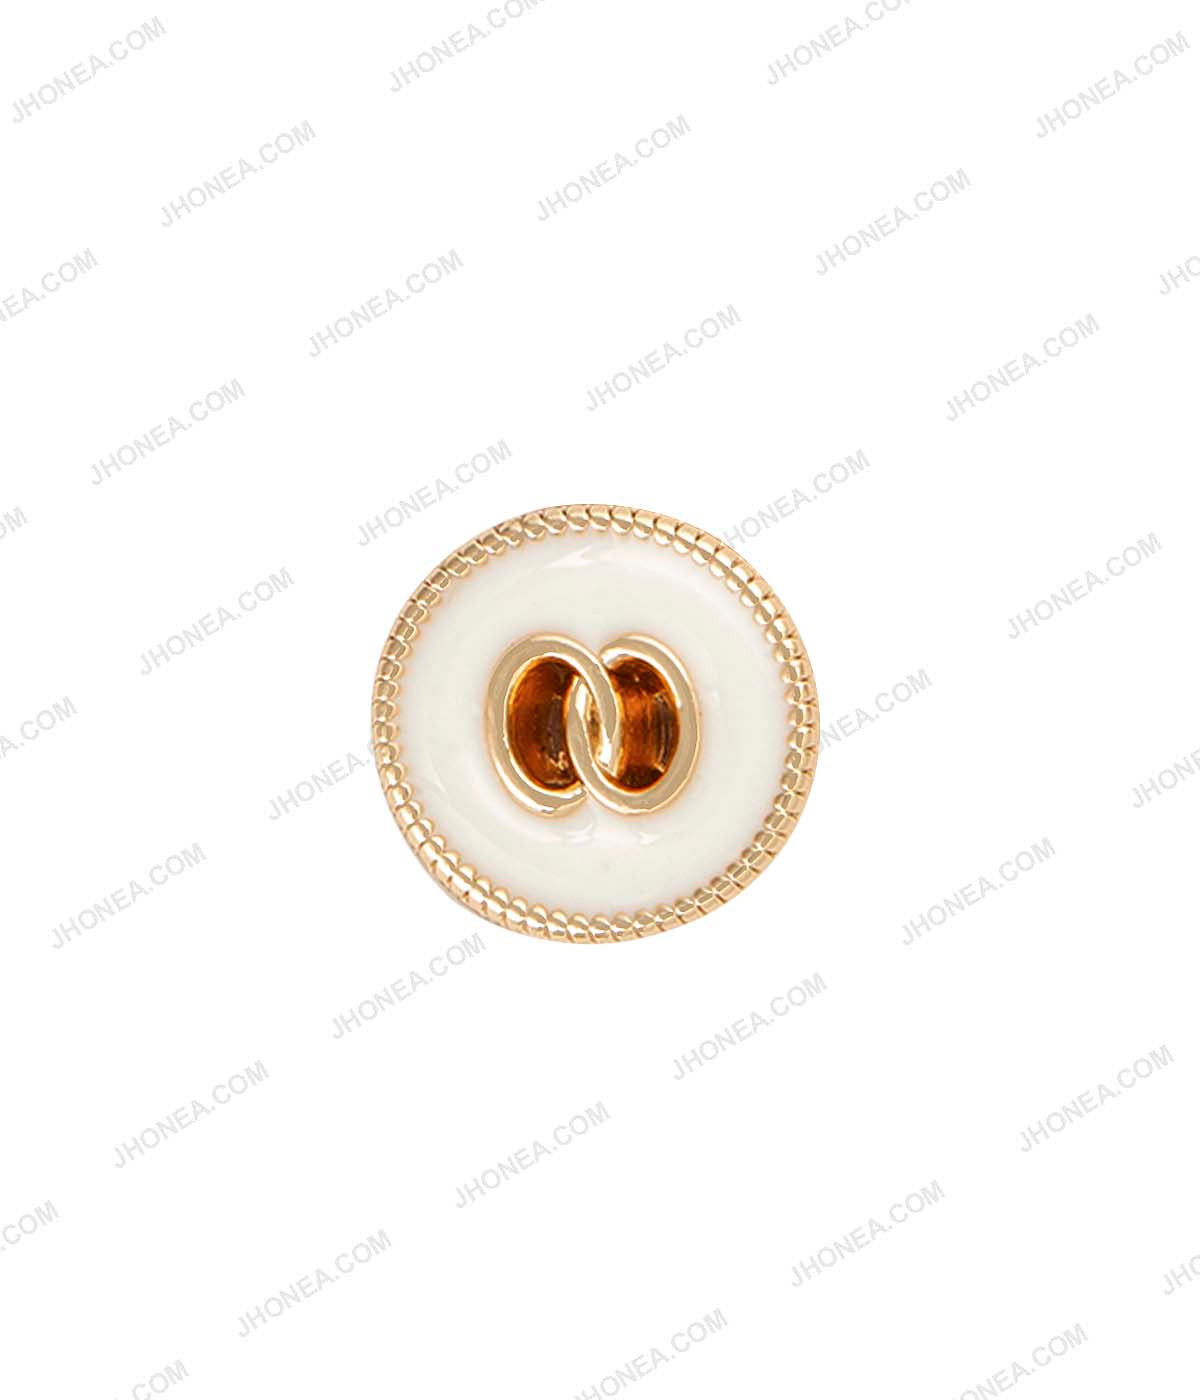 Fancy Decorative Enamel Surface 10mm (16L) Party Wear Shirt Buttons in Gold with White Color